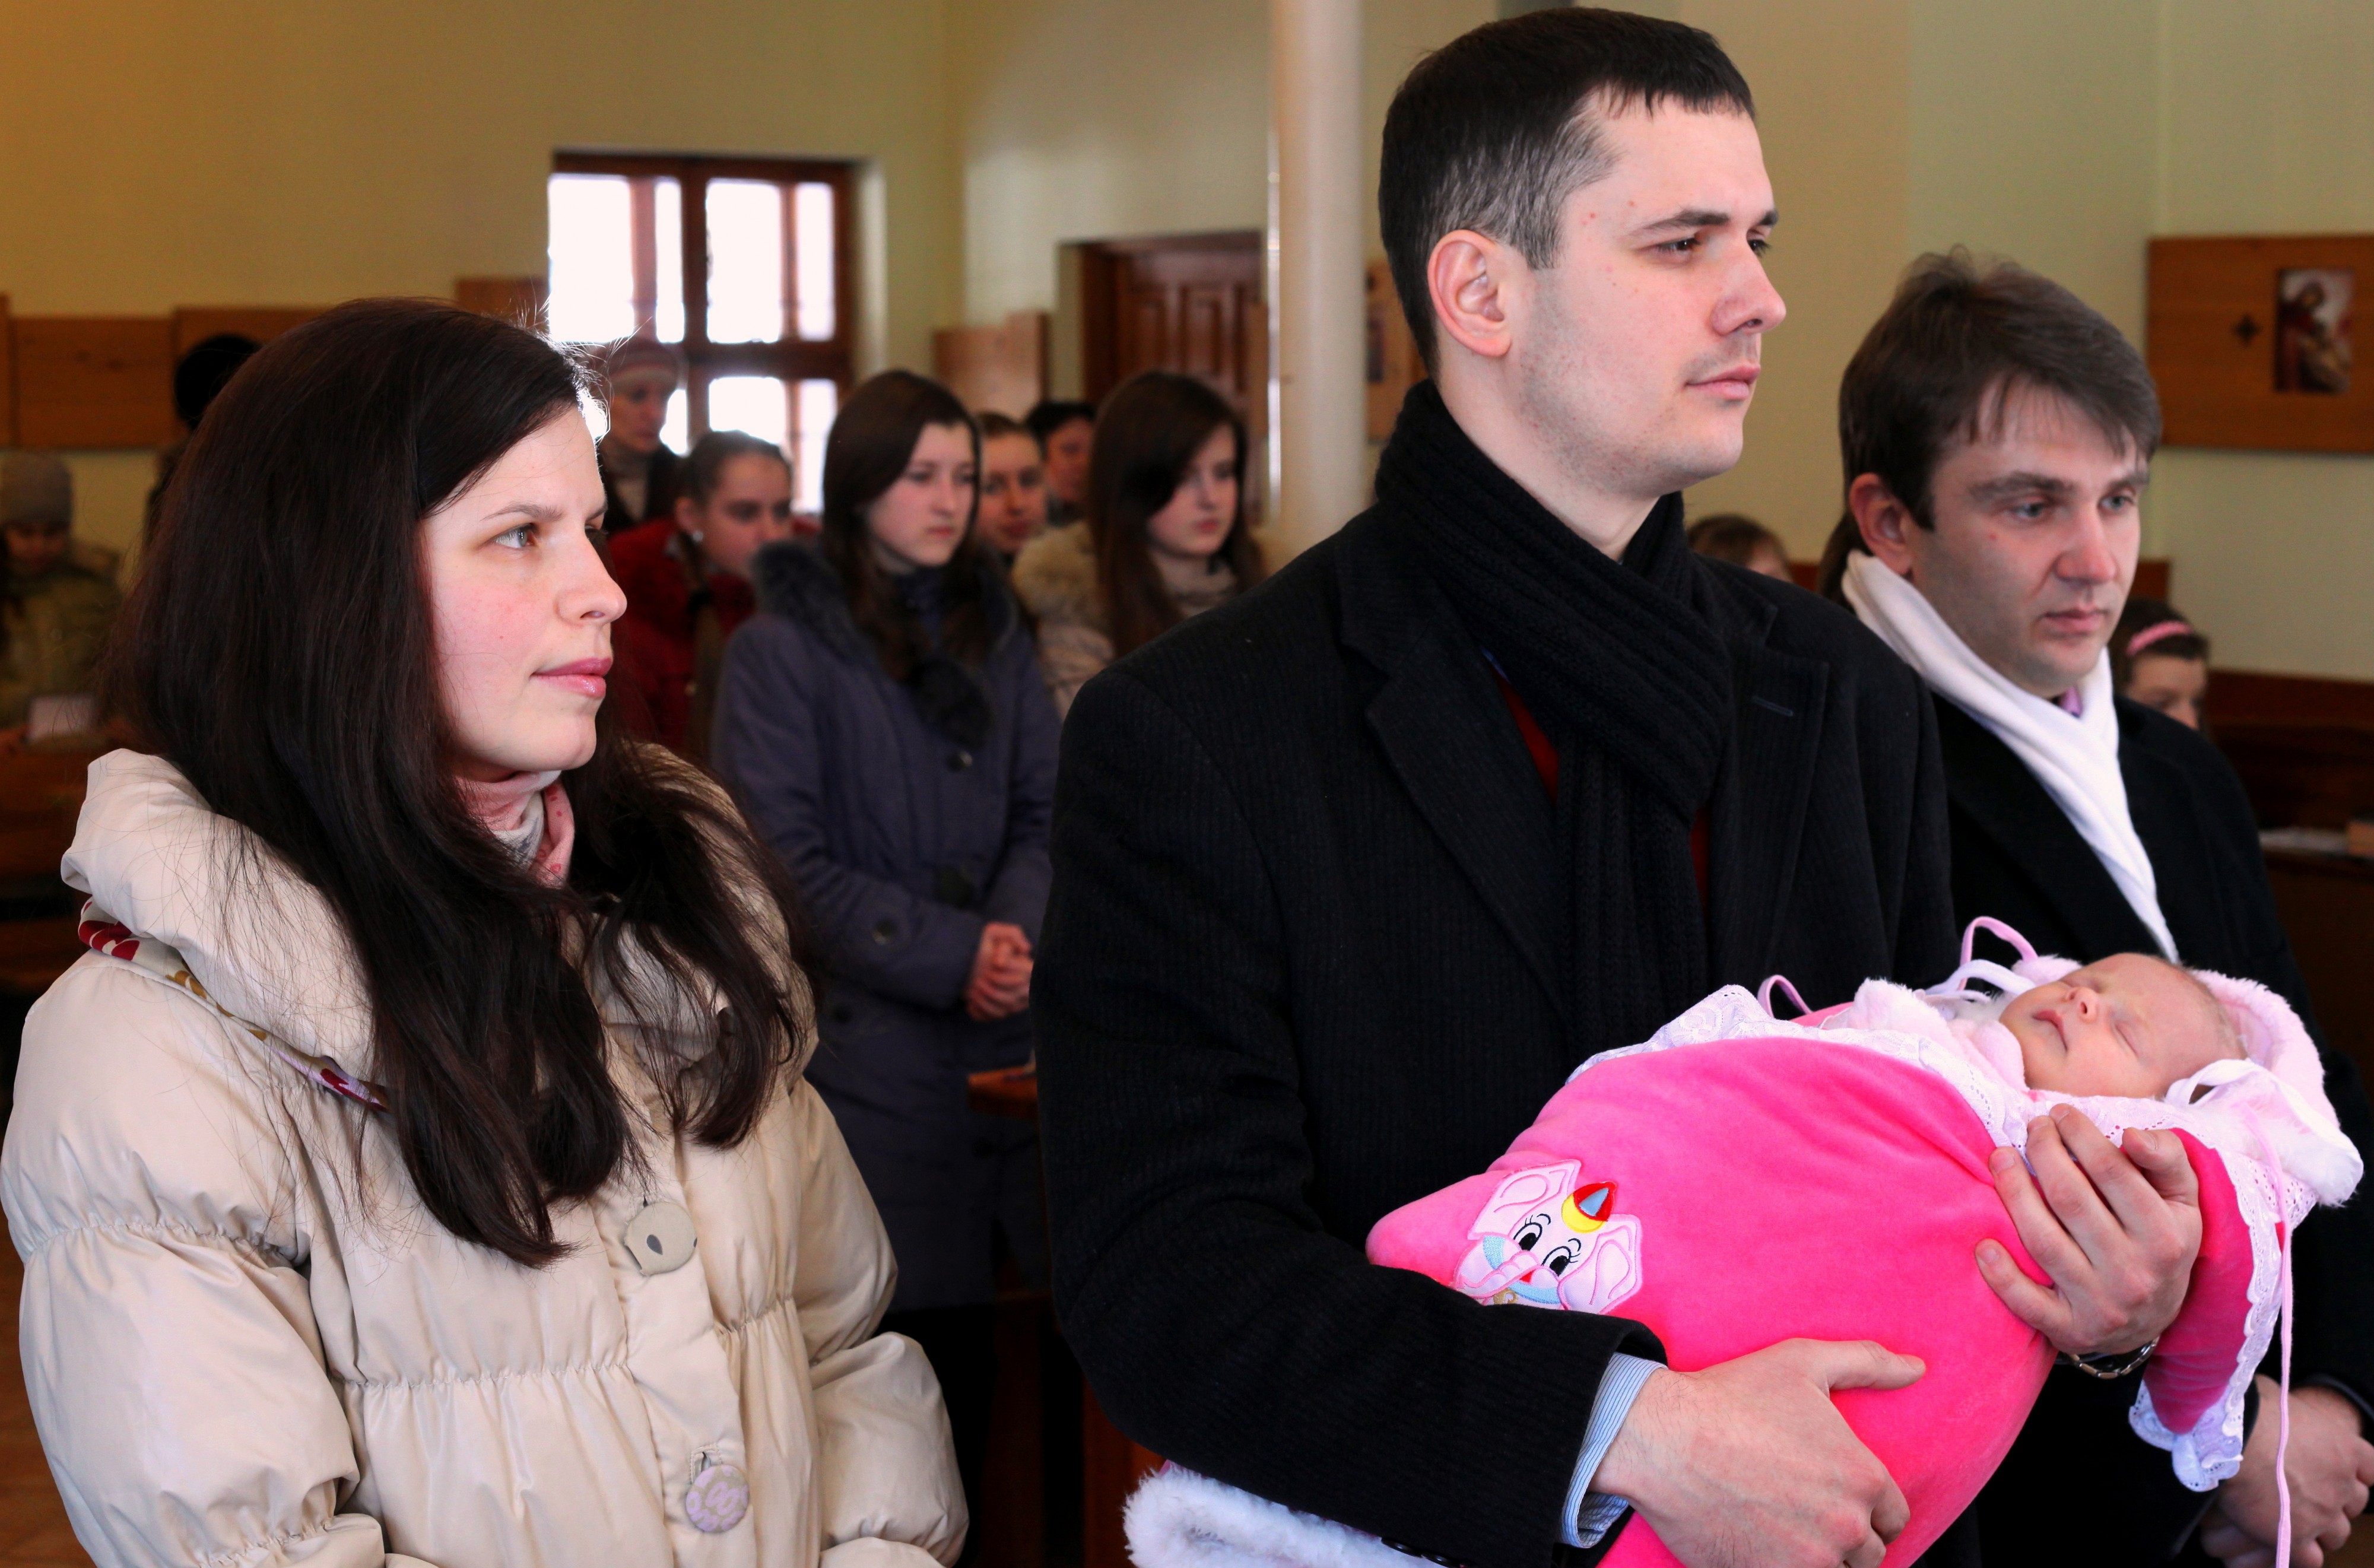 baptism of a baby girl in a Catholic church, picture 4